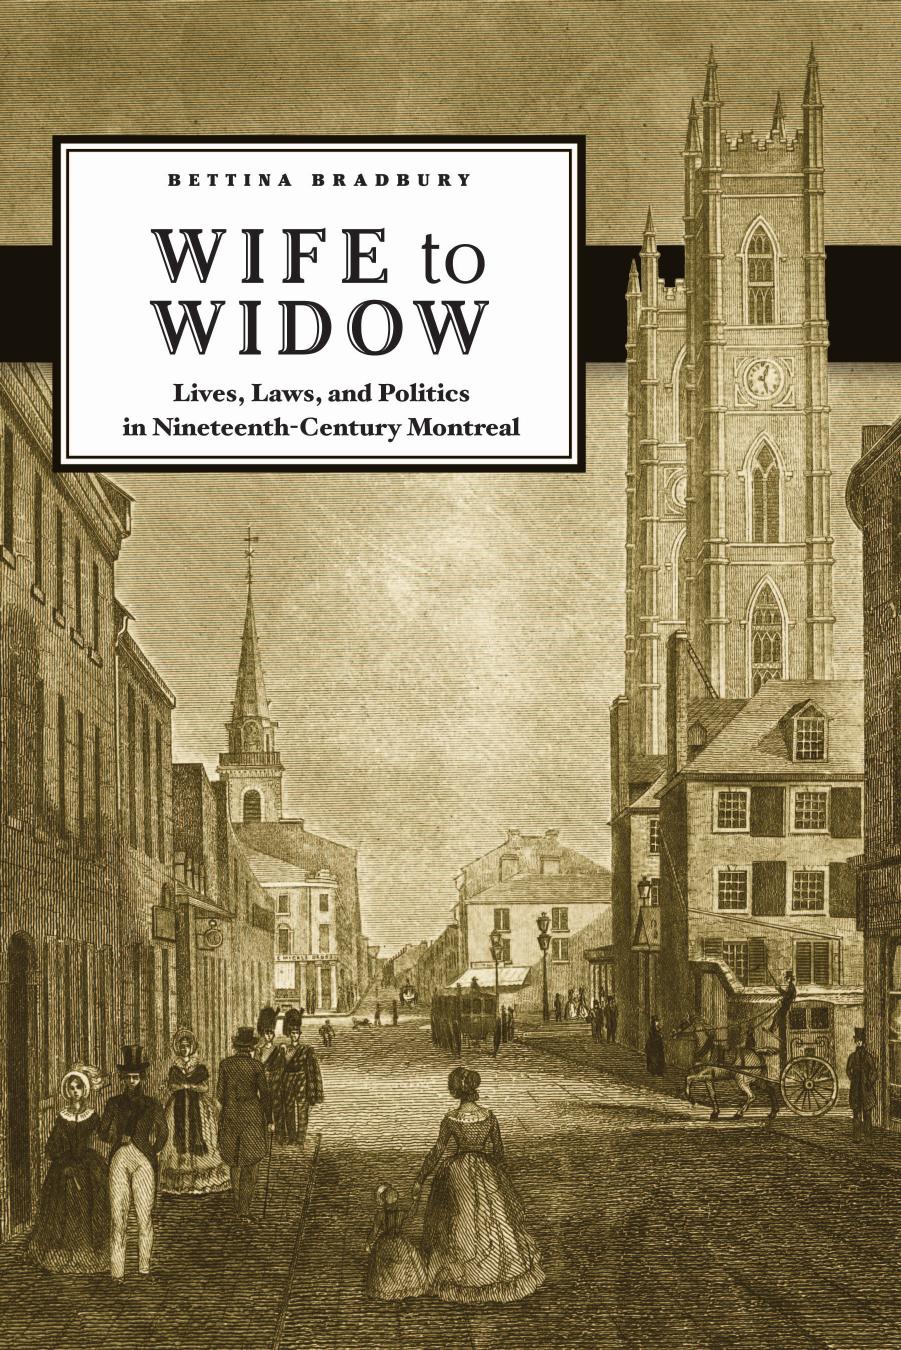 Wife to Widow: Lives, Laws, and Politics in Nineteenth-Century Montreal by Bettina Bradbury